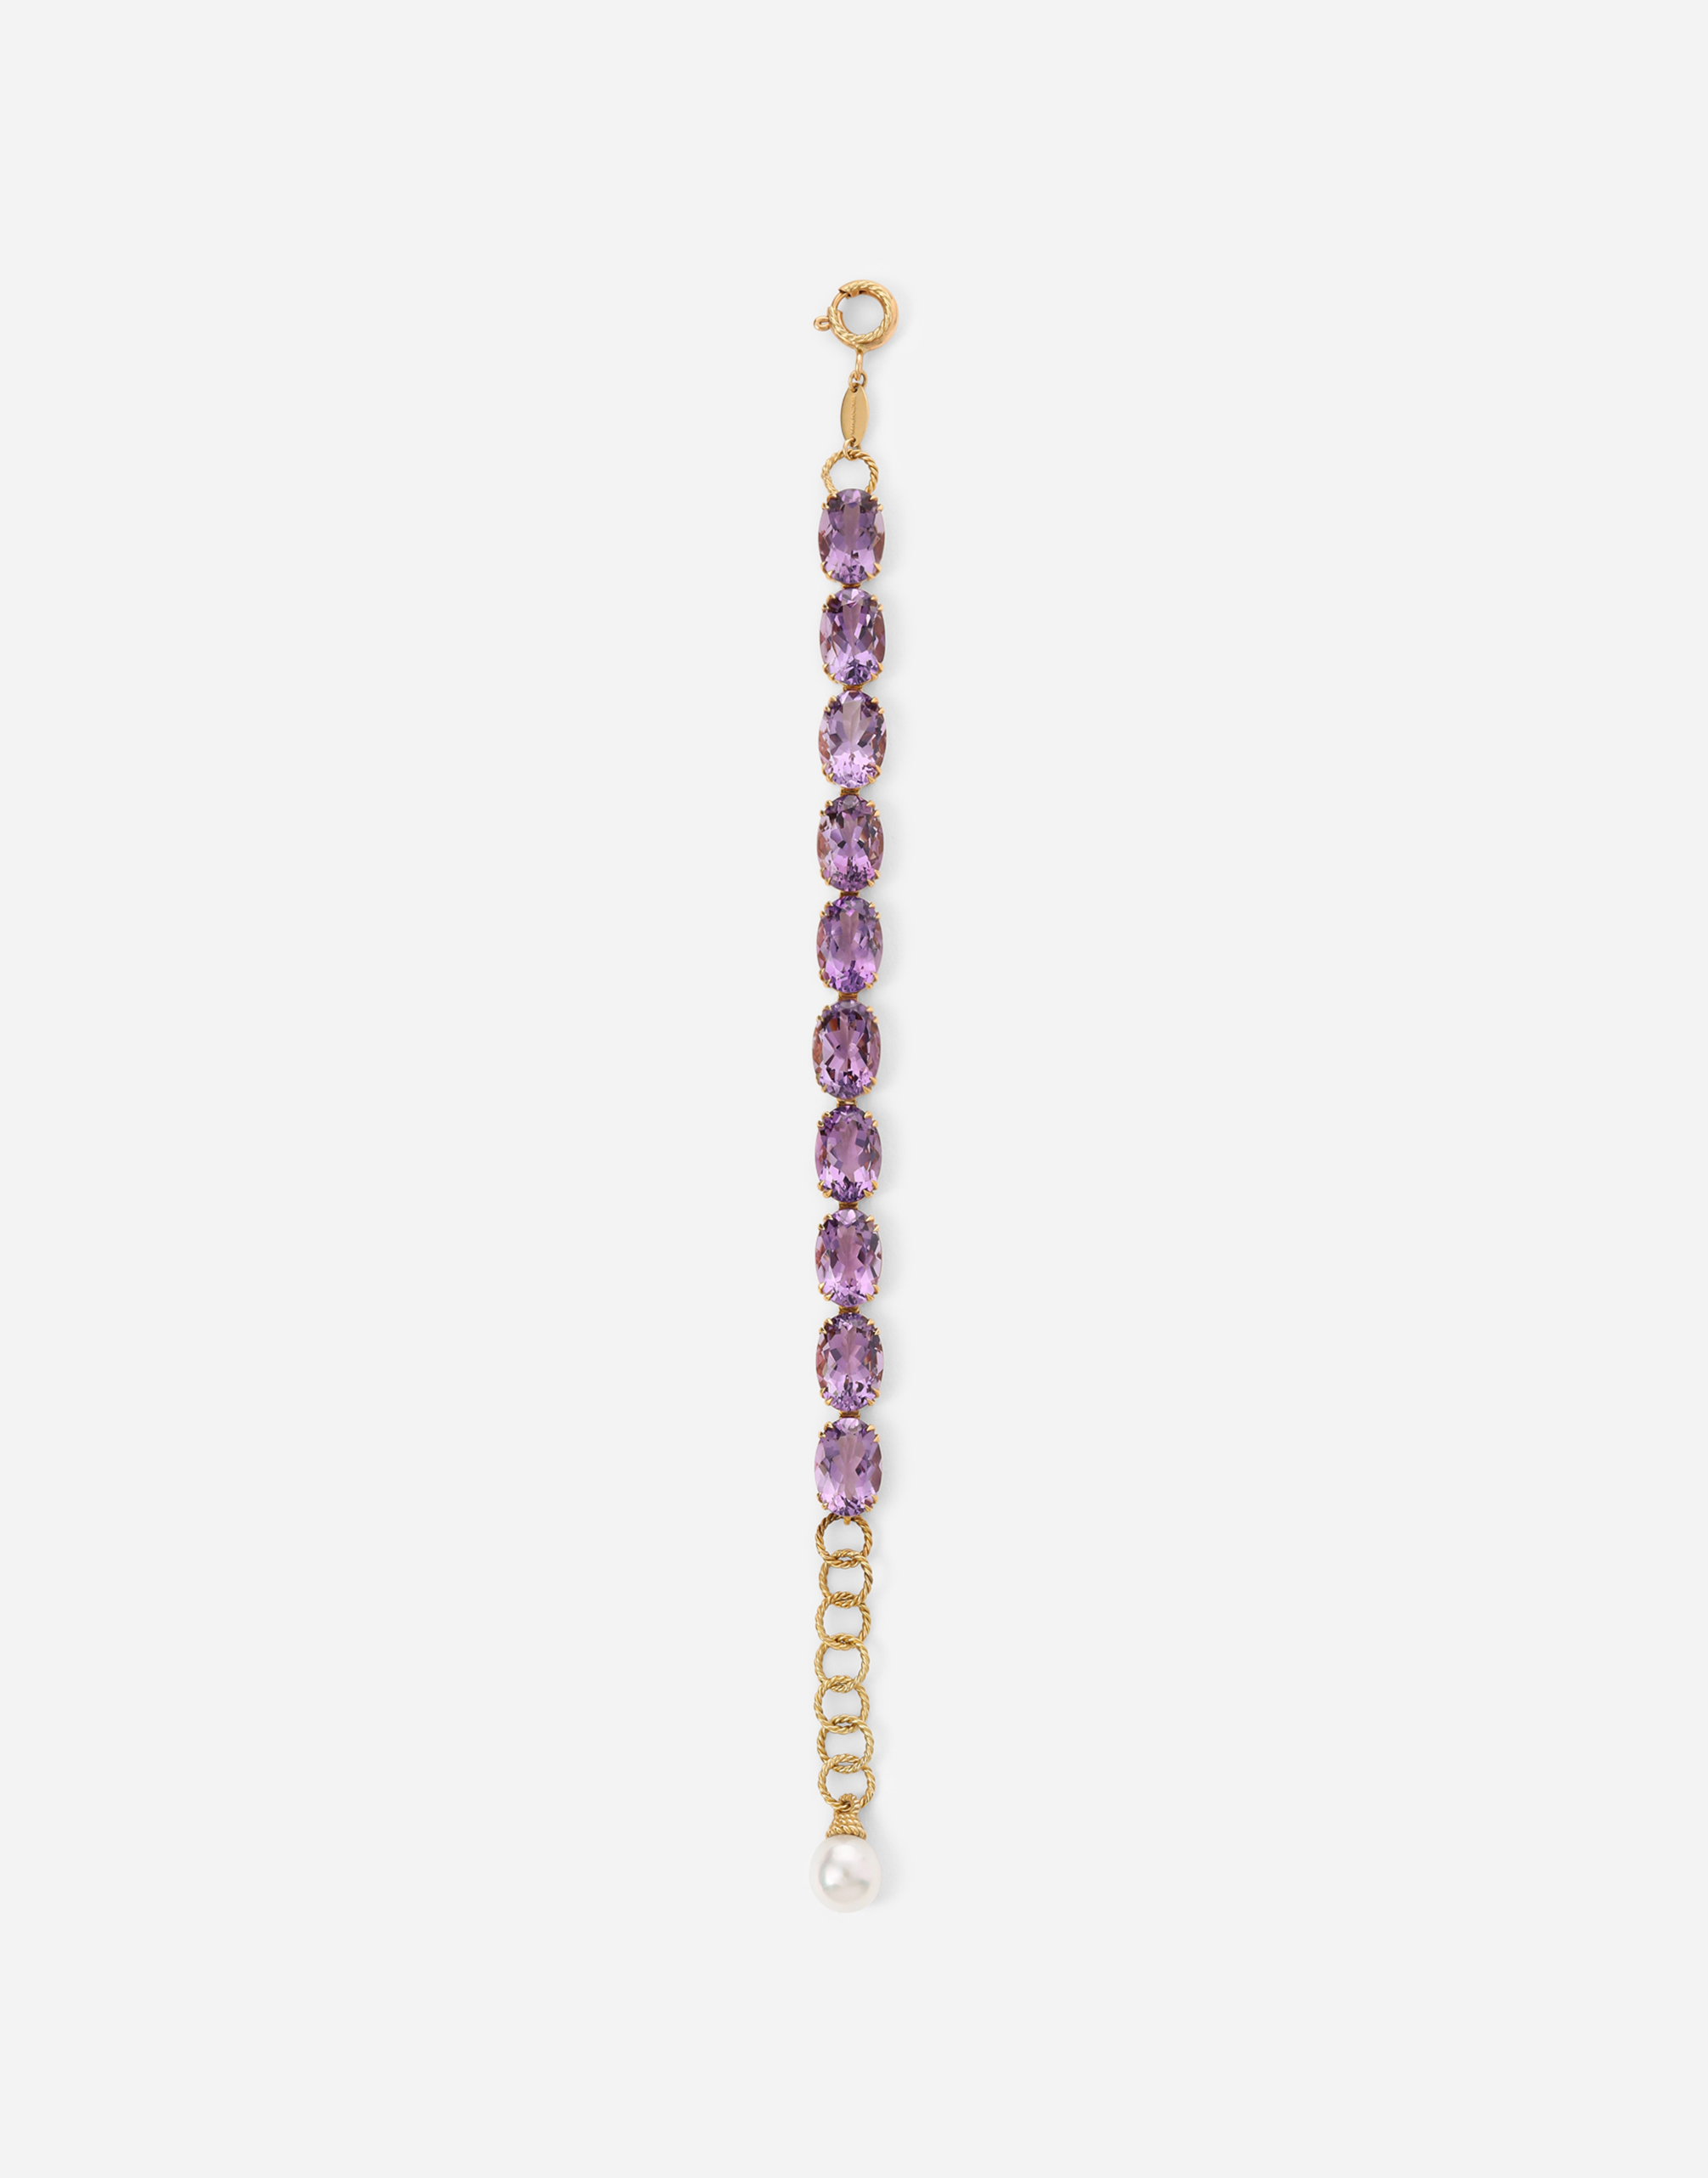 Anna bracelet in yellow 18kt gold with amethysts in Gold